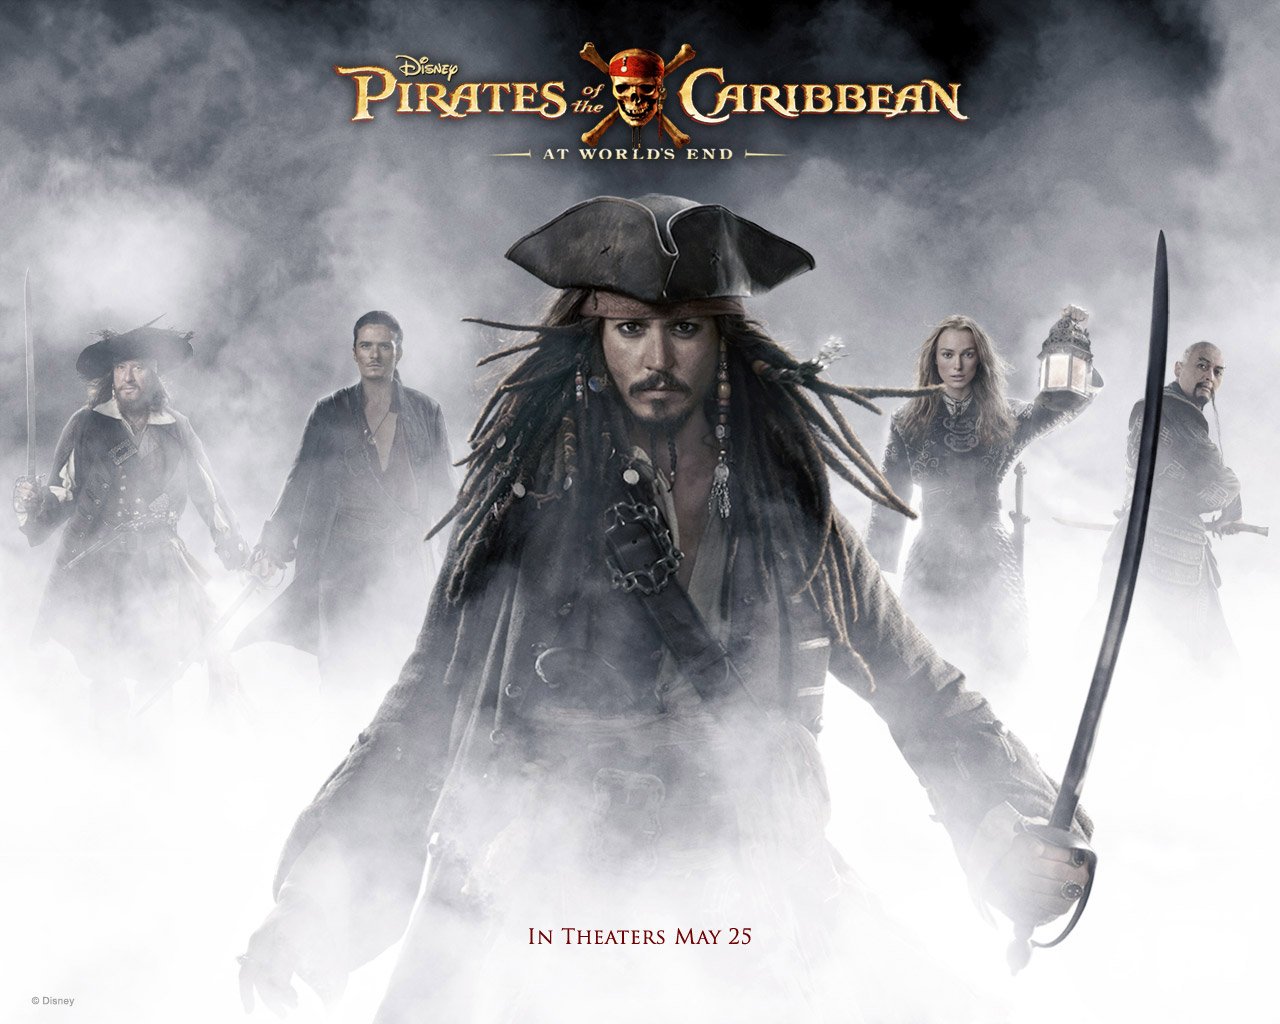 pirates of the caribbean 4 free download in hindi hd